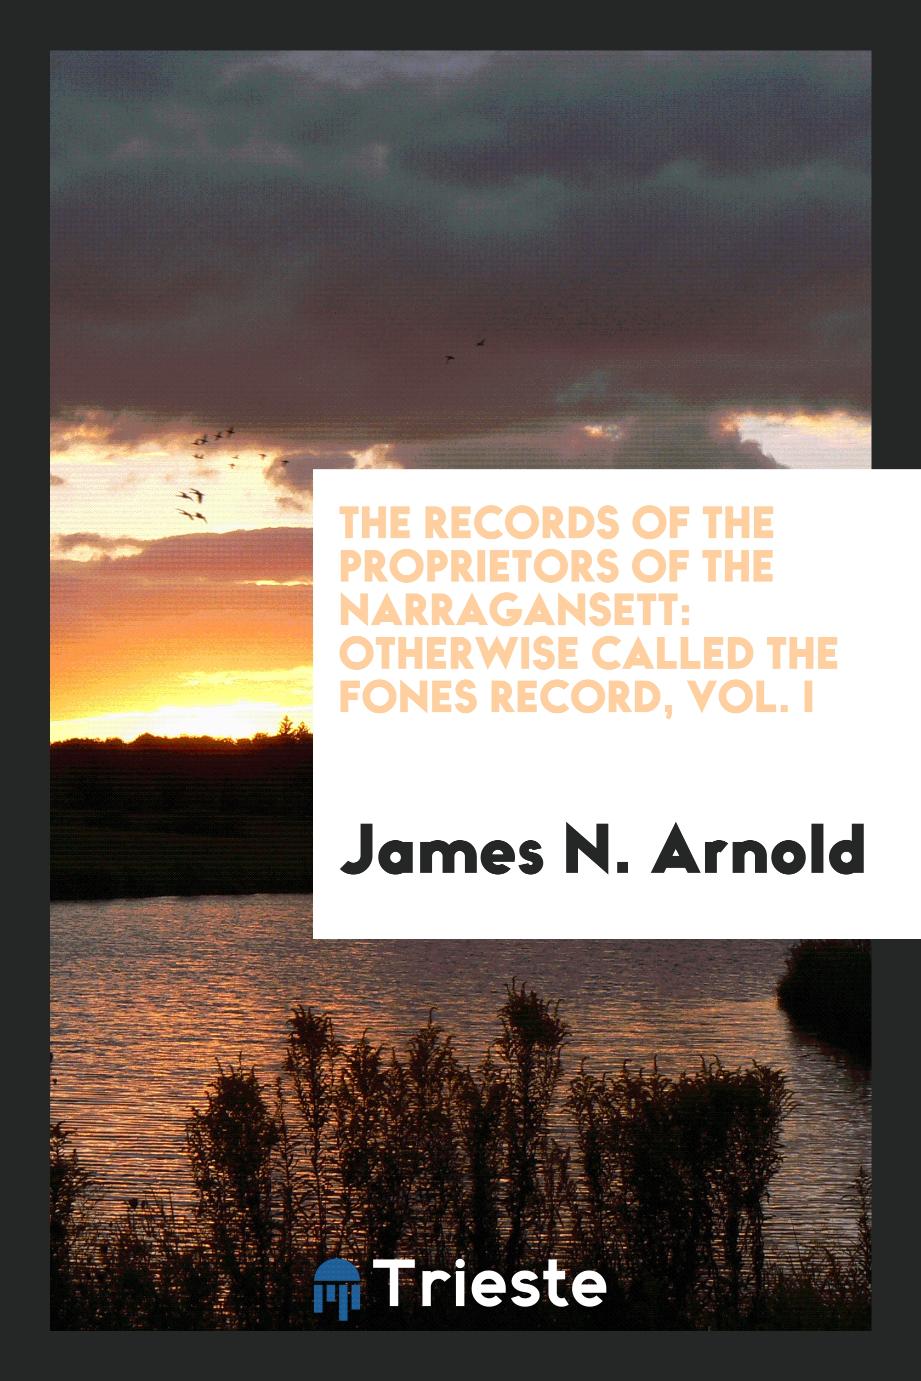 The records of the proprietors of the Narragansett: otherwise called the Fones record, Vol. I